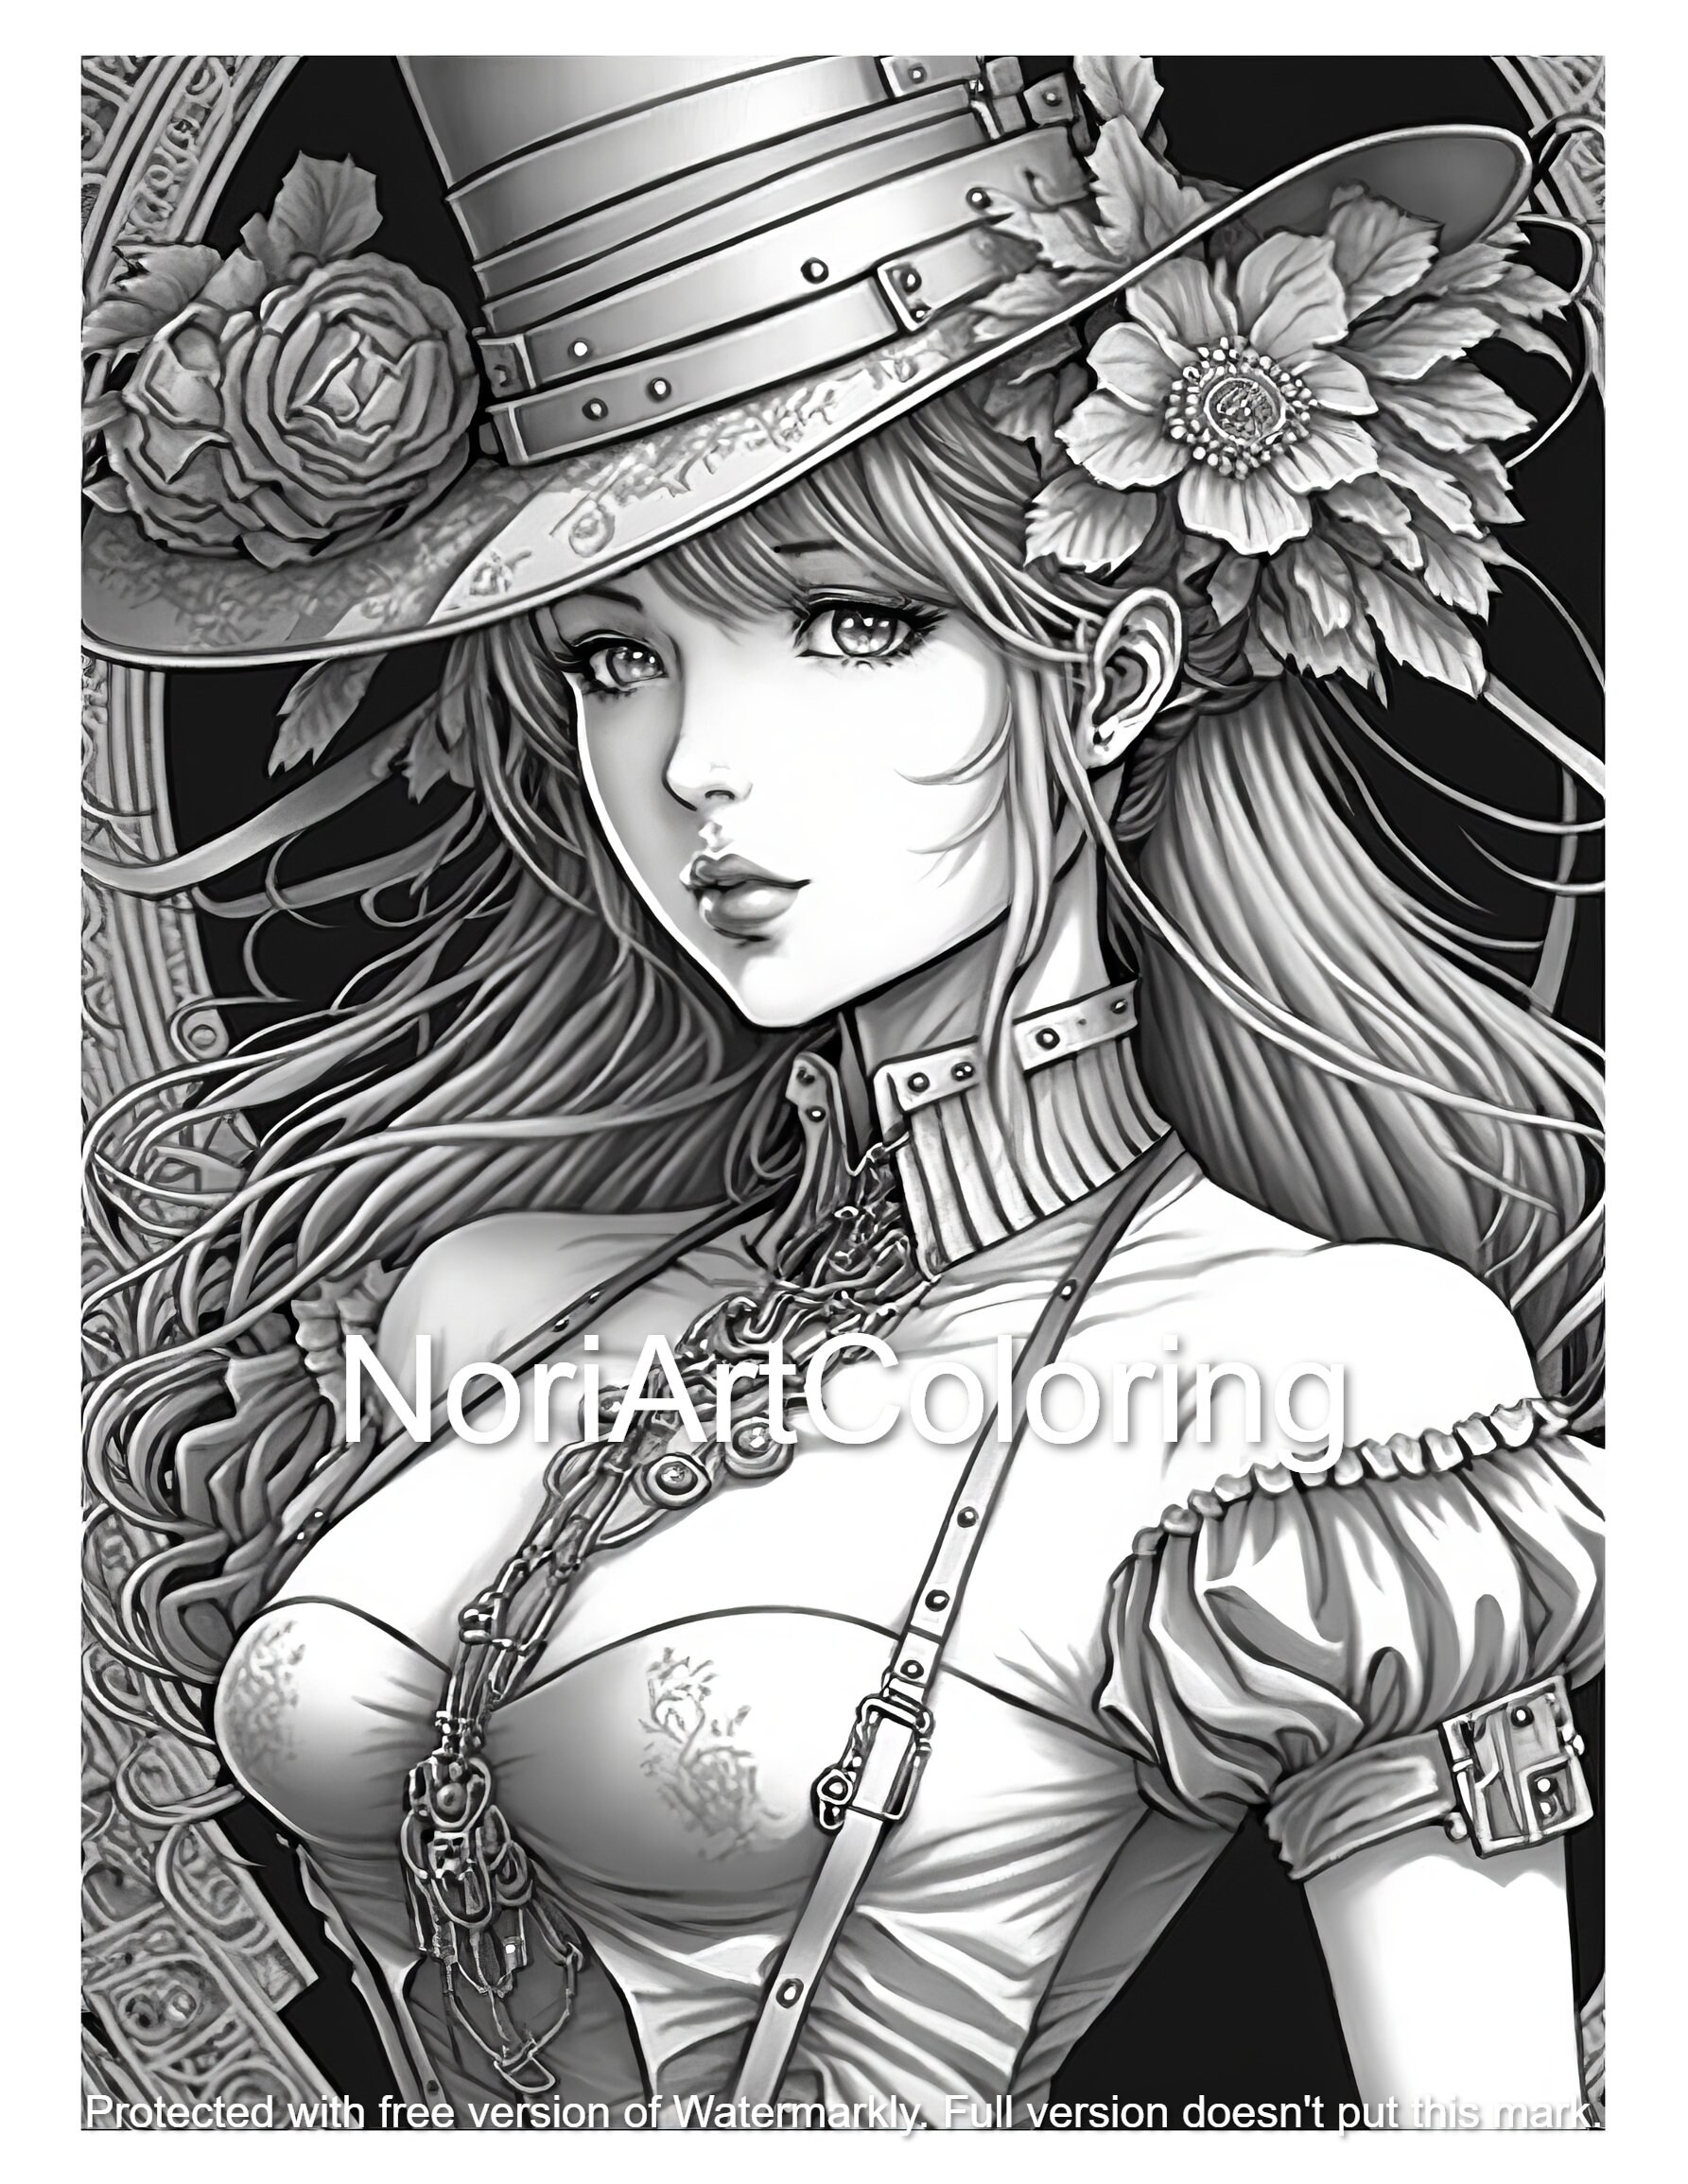 Anime Art Victorian Steampunk Anime Coloring Book Vol. 1 - By Claire Reads  (paperback) : Target